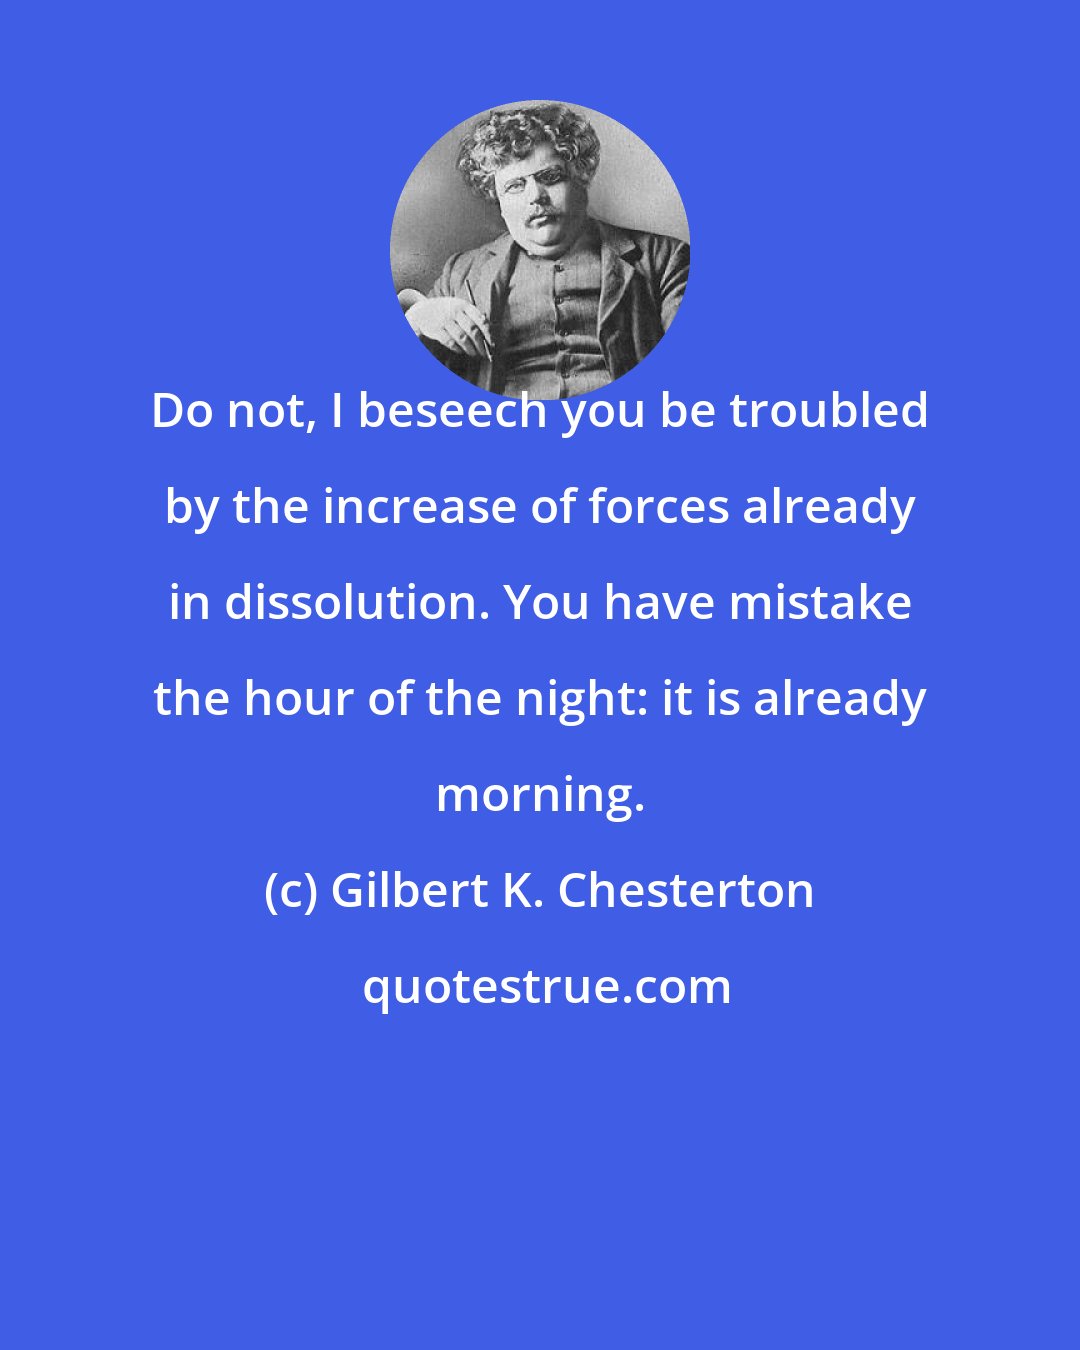 Gilbert K. Chesterton: Do not, I beseech you be troubled by the increase of forces already in dissolution. You have mistake the hour of the night: it is already morning.